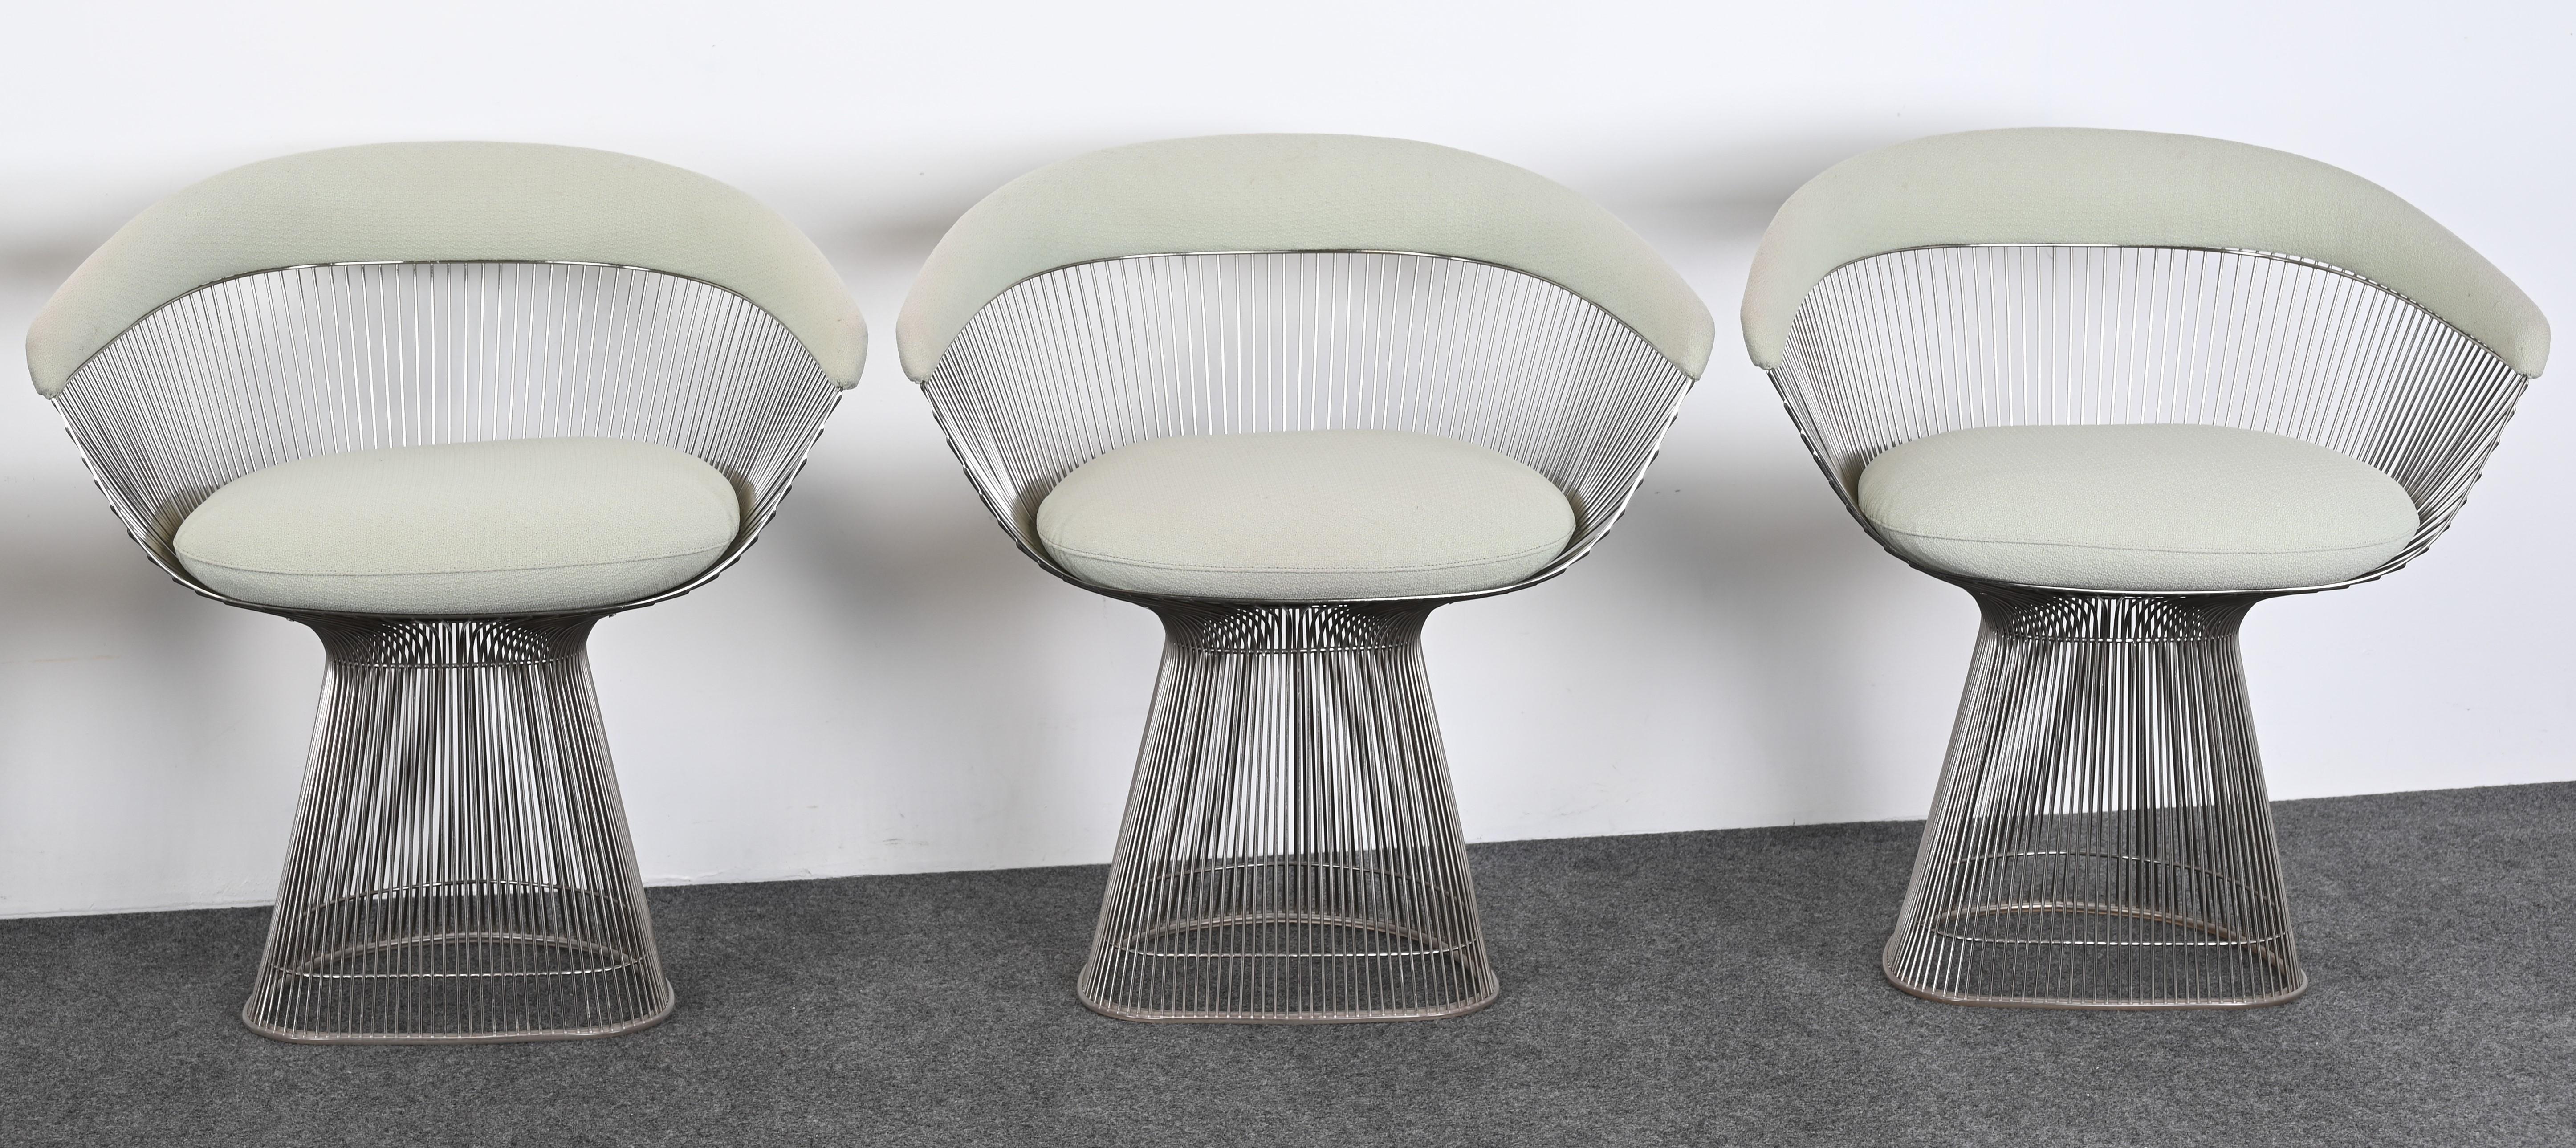 Steel Set of Six Dining Chairs Designed by Warren Platner for Knoll, 20th Century For Sale